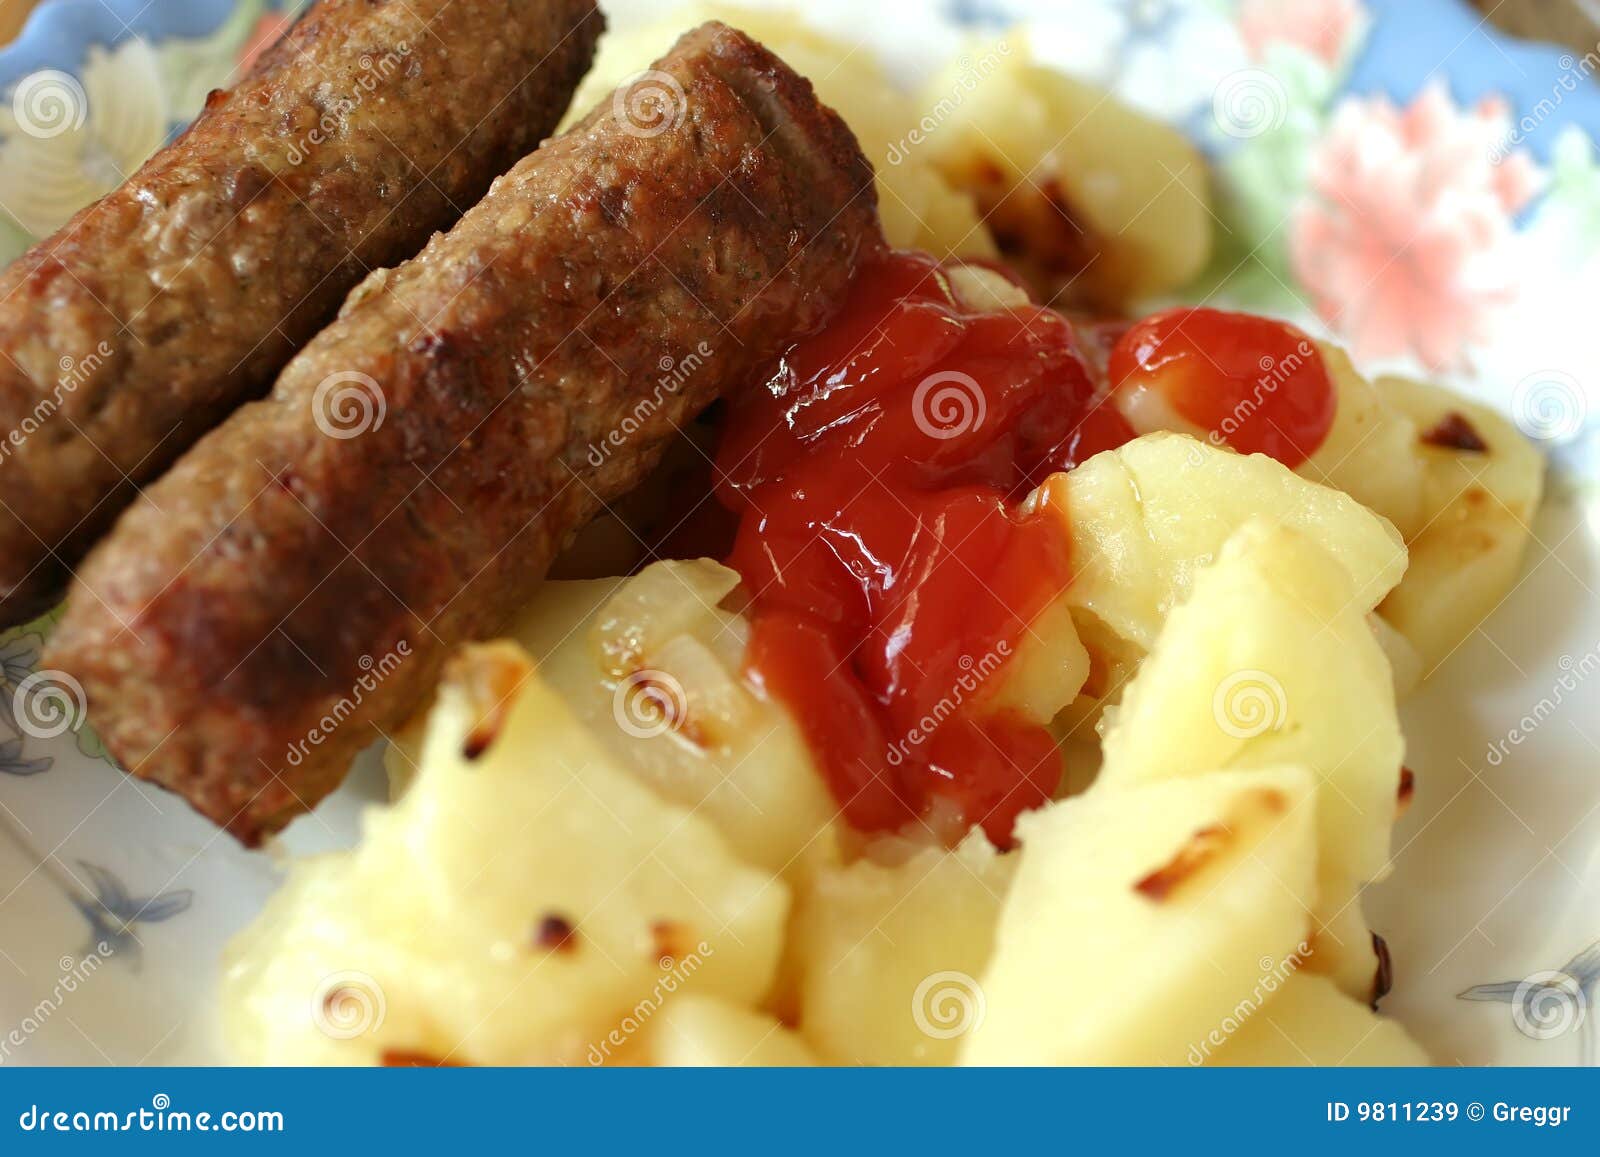 grilled sausages and coocked potatoes